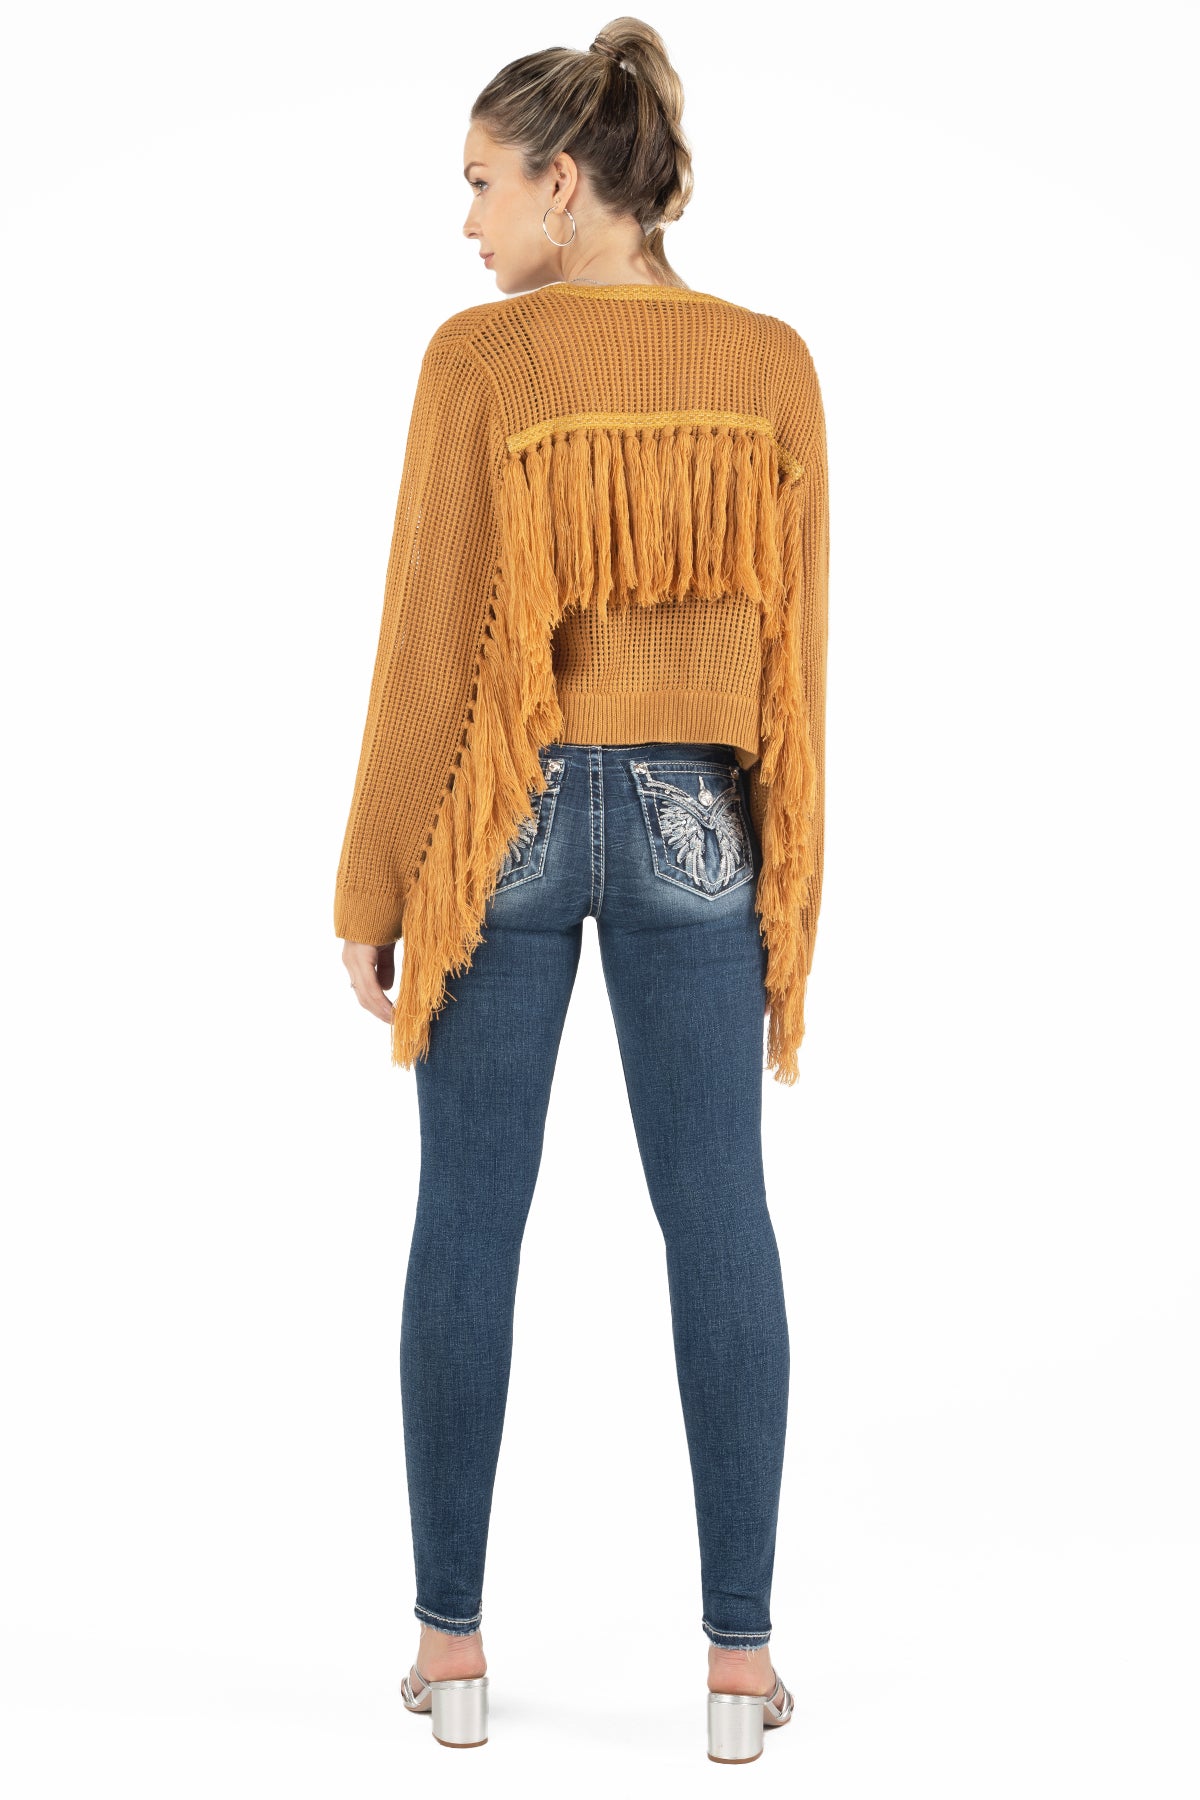 Fringe Knitted Cardigan | Only $69.00 | Brown | Miss Me